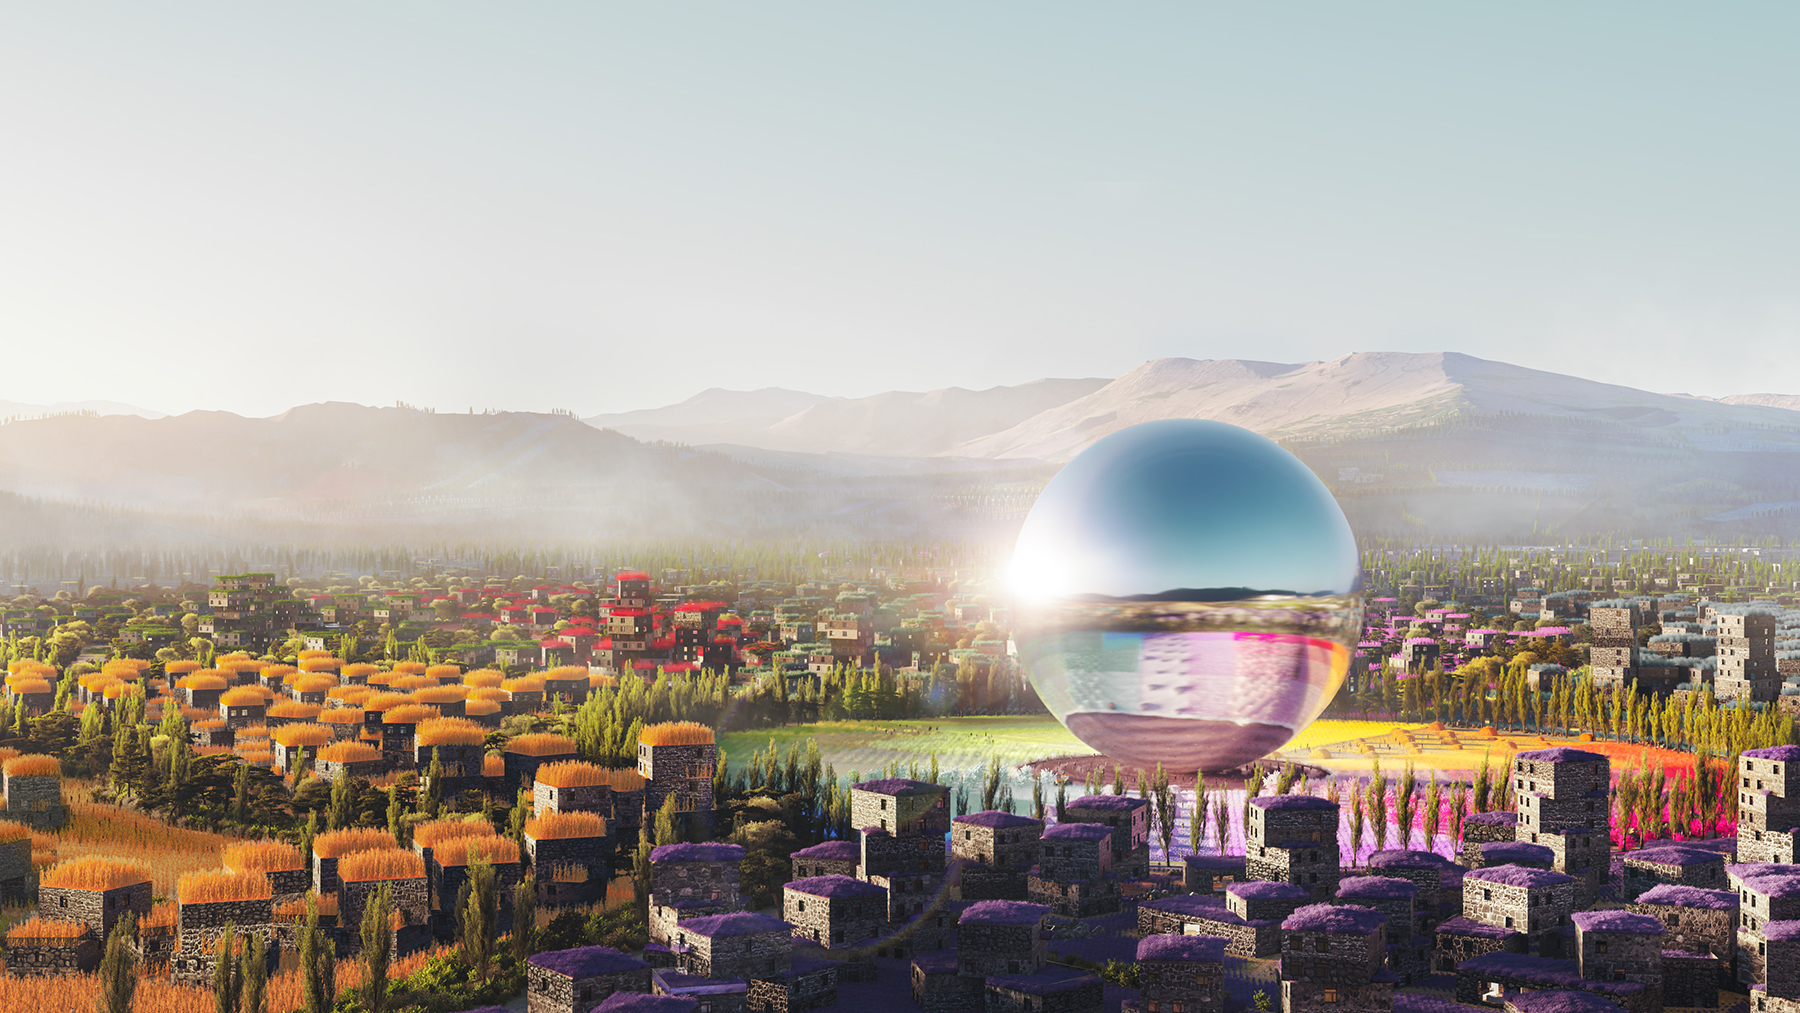 COLORFUL FIELDS AND SPHERE BUILDING